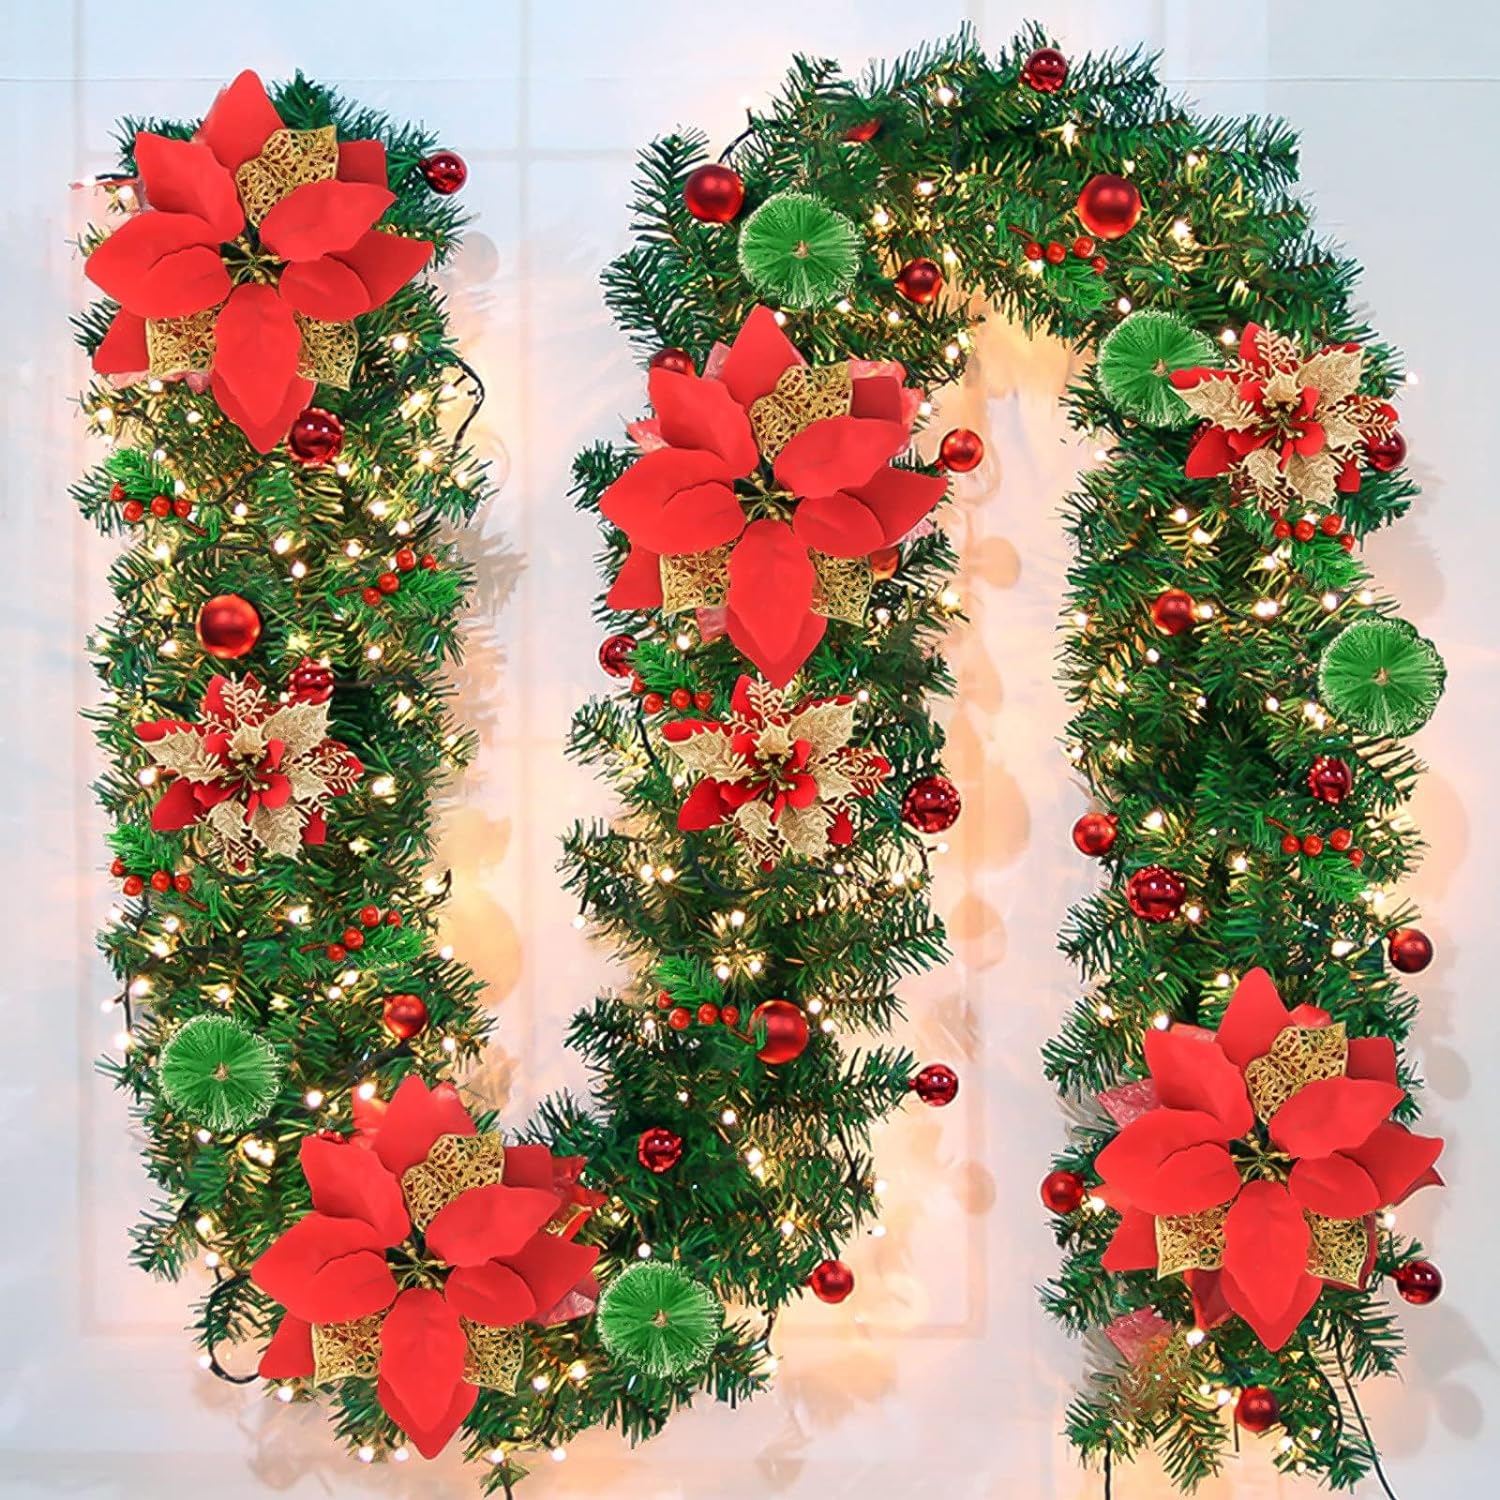 Pre-Lit Artificial Christmas Garland, Green, Warm Lights, Decorated with Red Flowers, Balls, Berries, Snowy Pine for Home Stairs Fireplace Front, Christmas Collection, 9 Ft